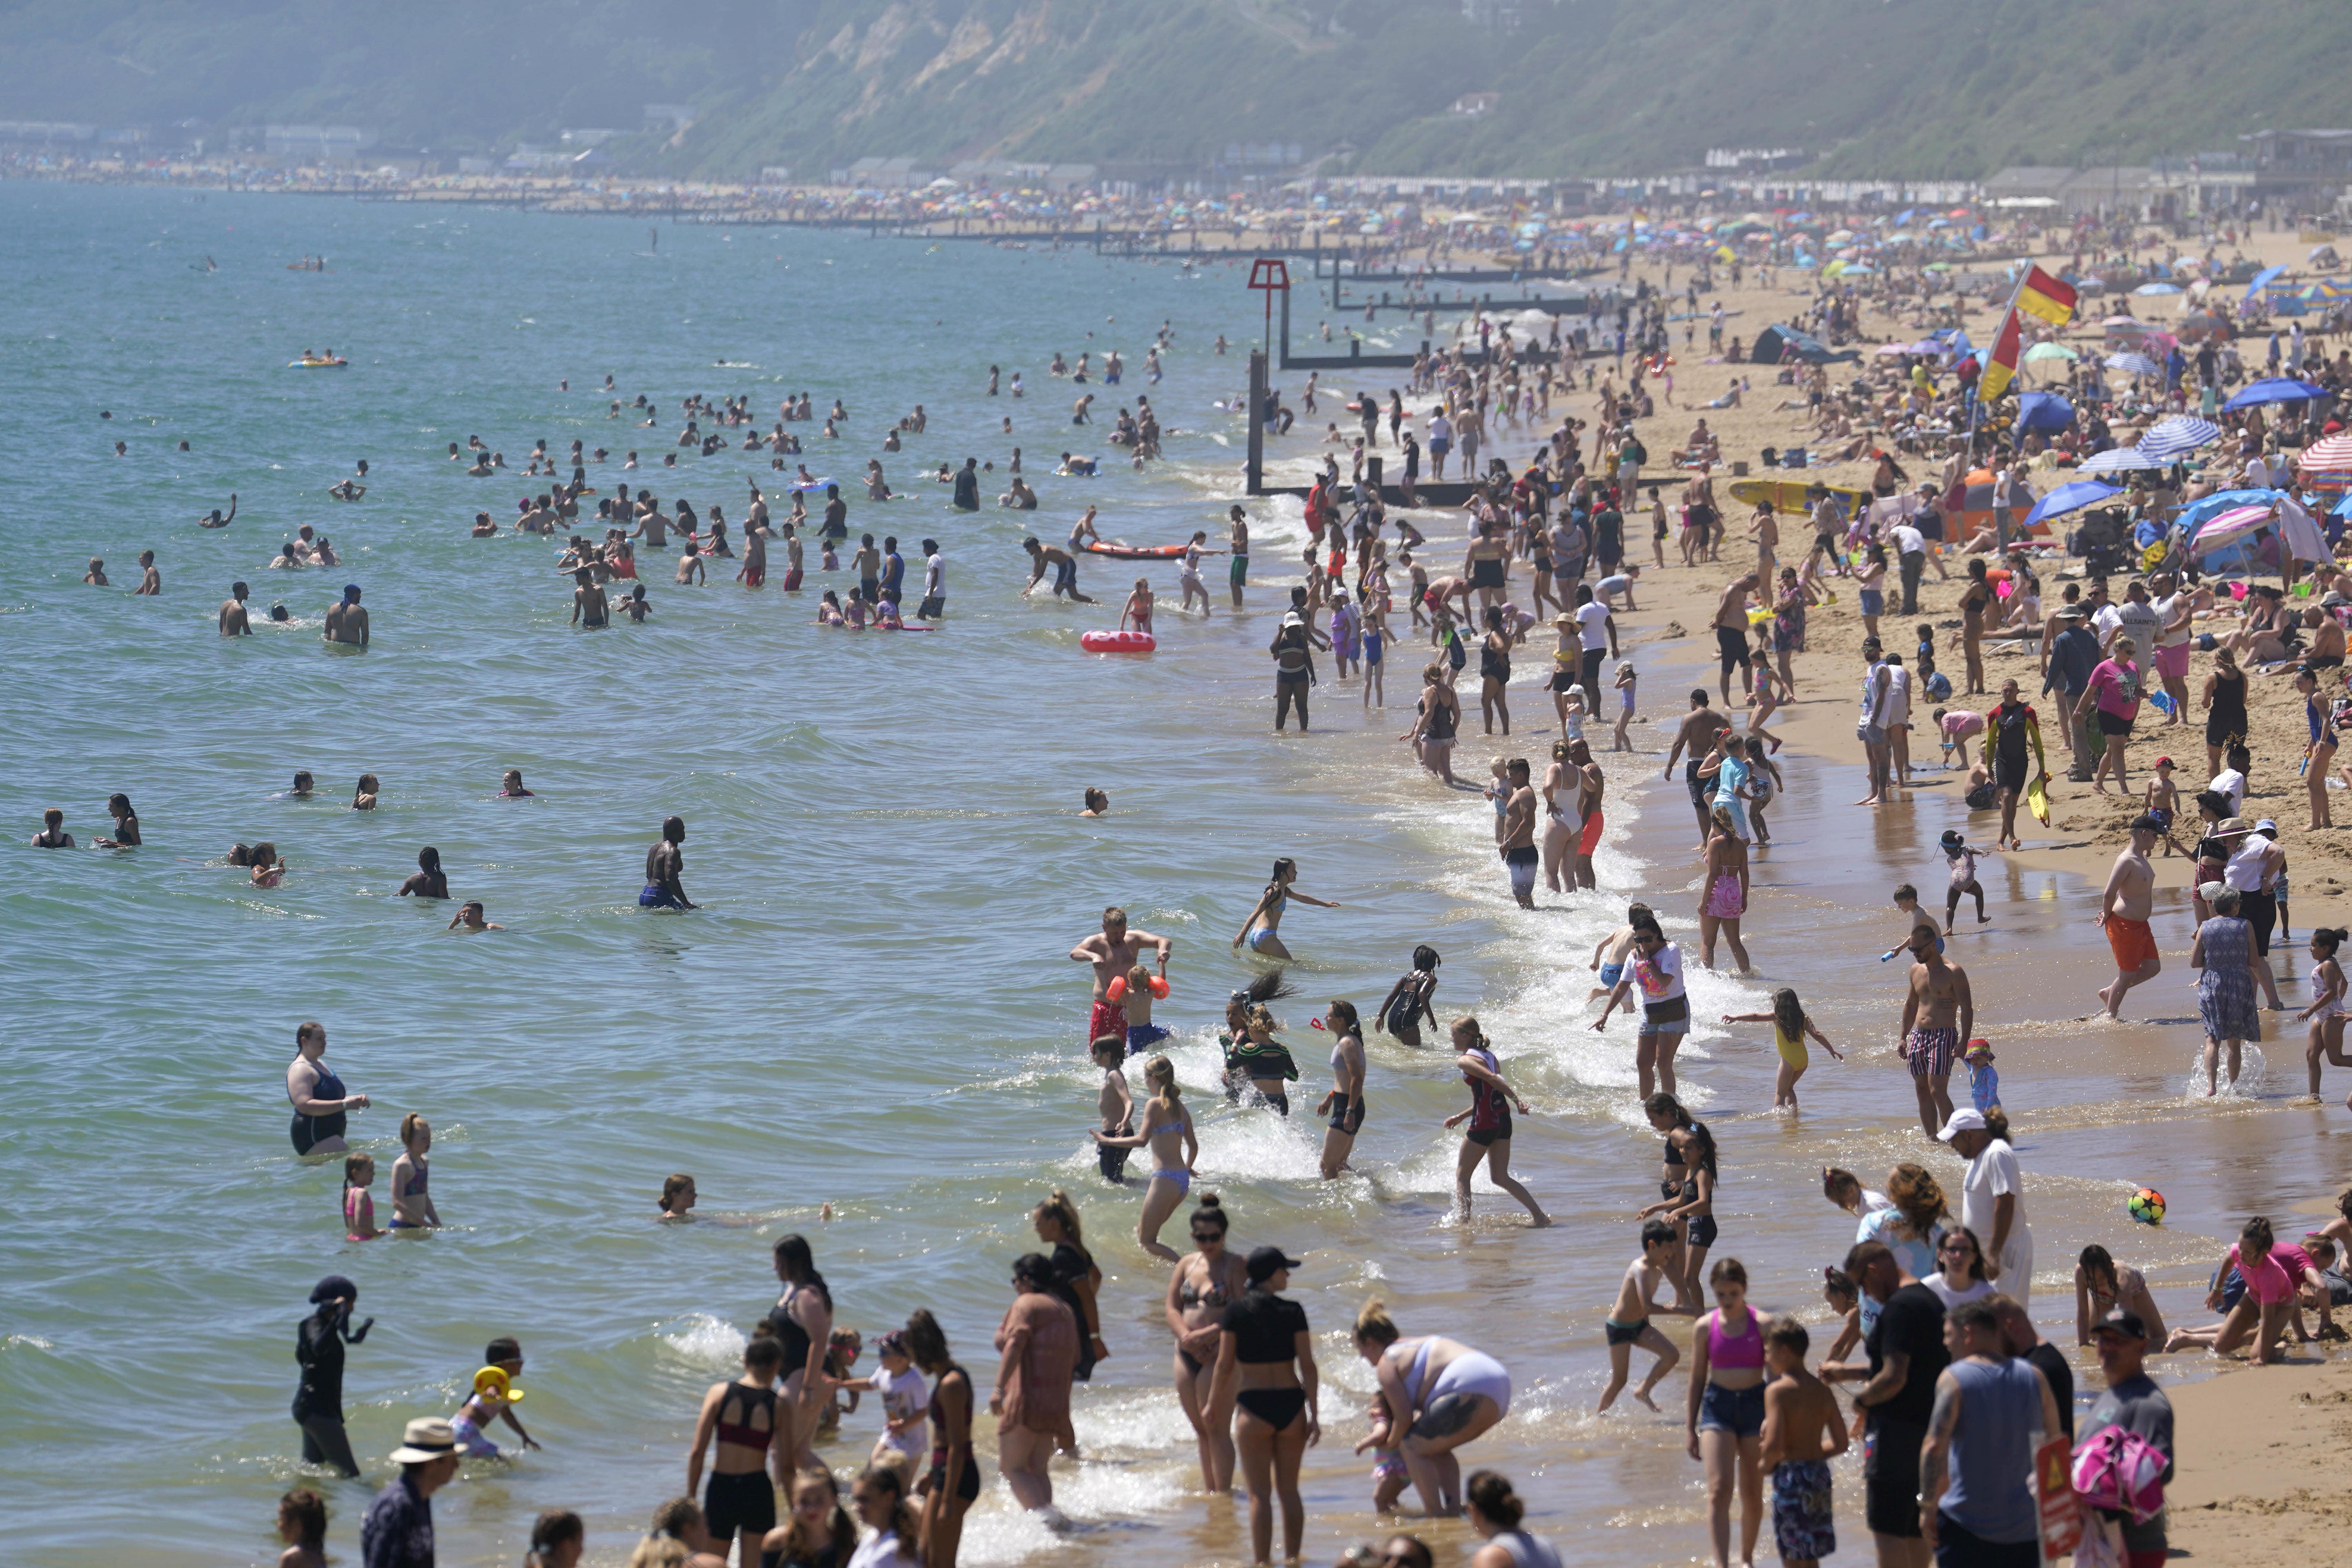 A heatwave may be on the way for parts of the UK